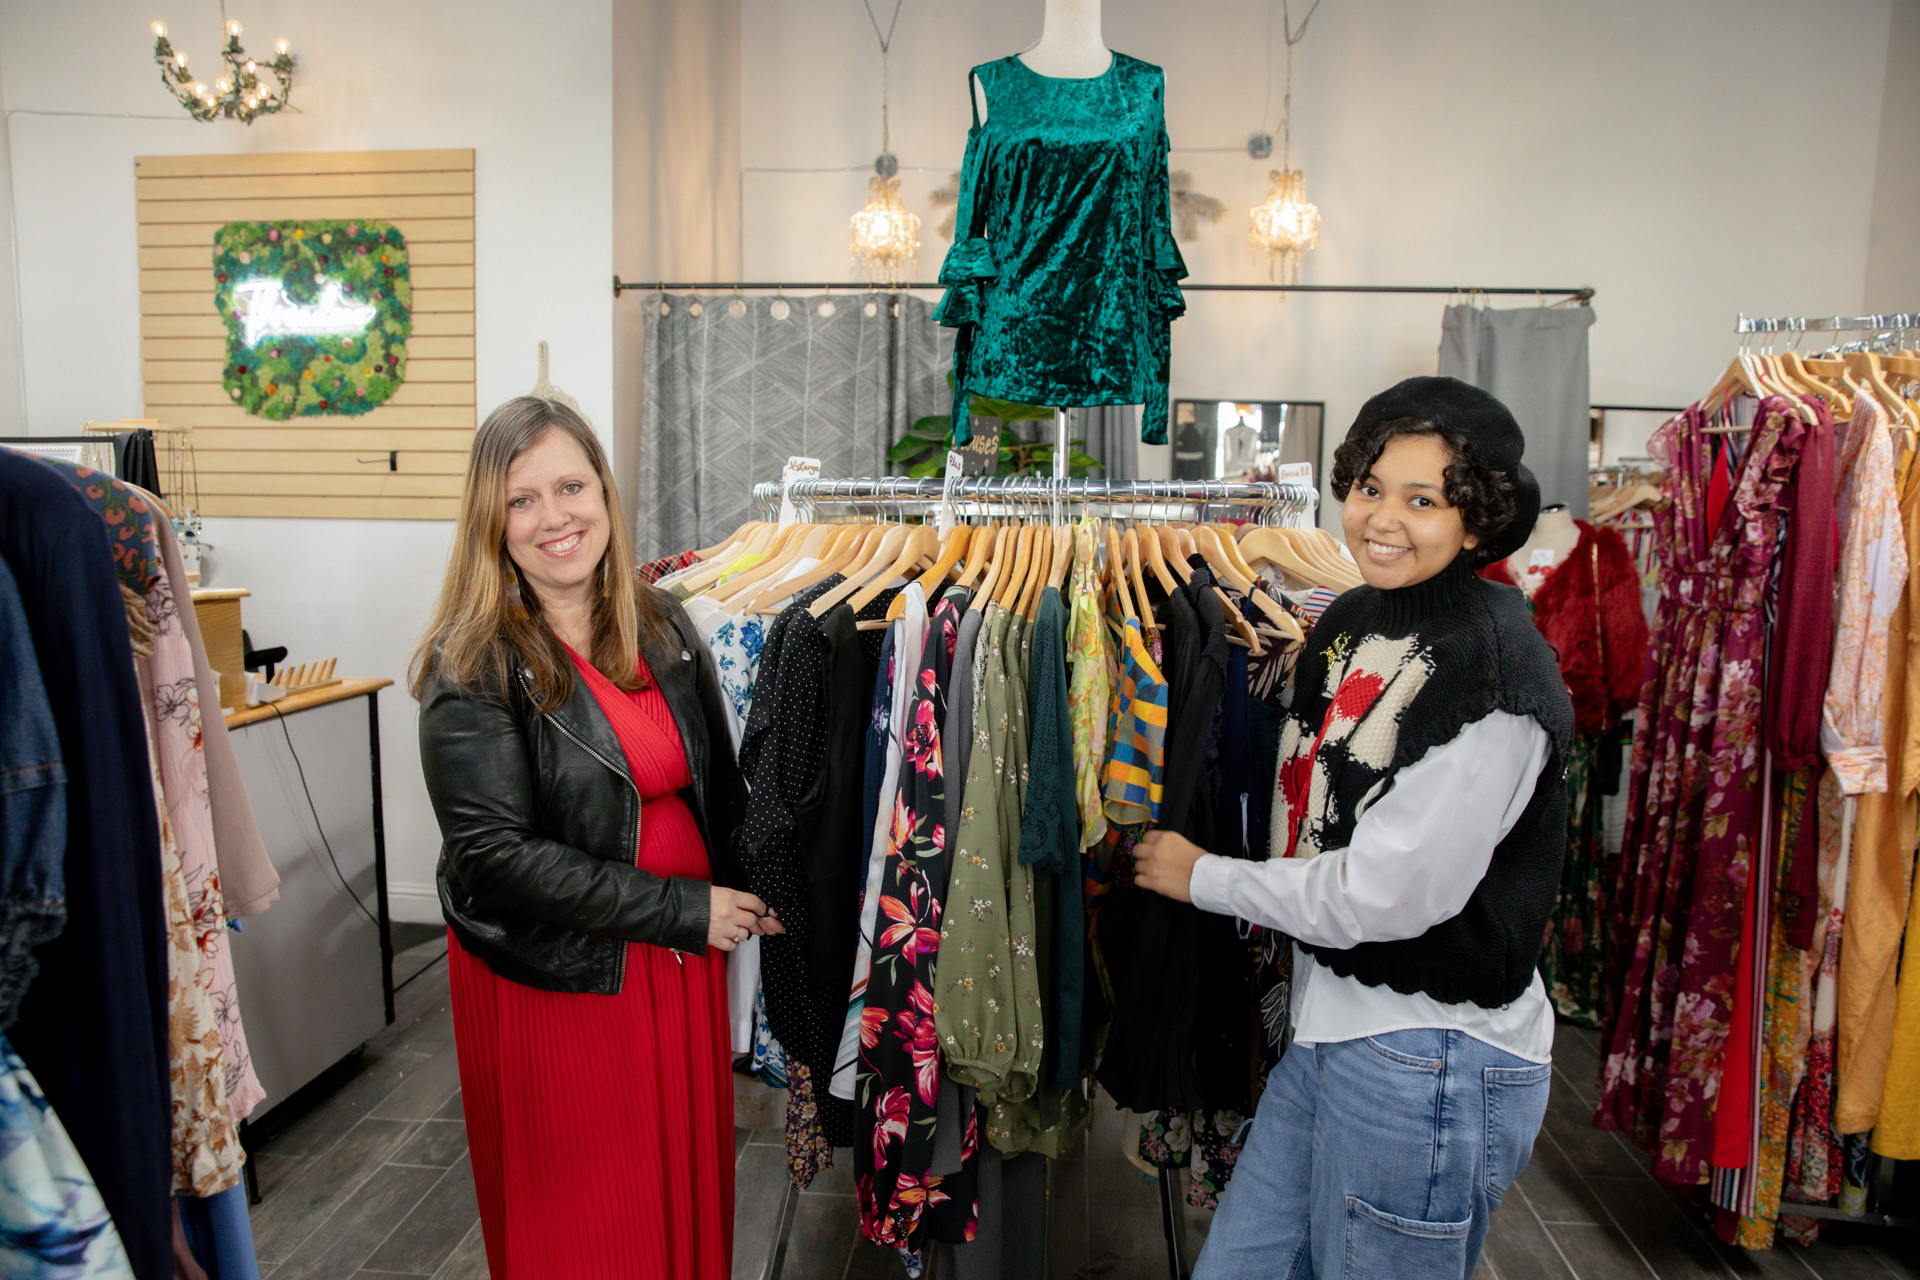 A store owner and a Sac State student who has been working at her business show off clothing in the Old Sacramento shop.